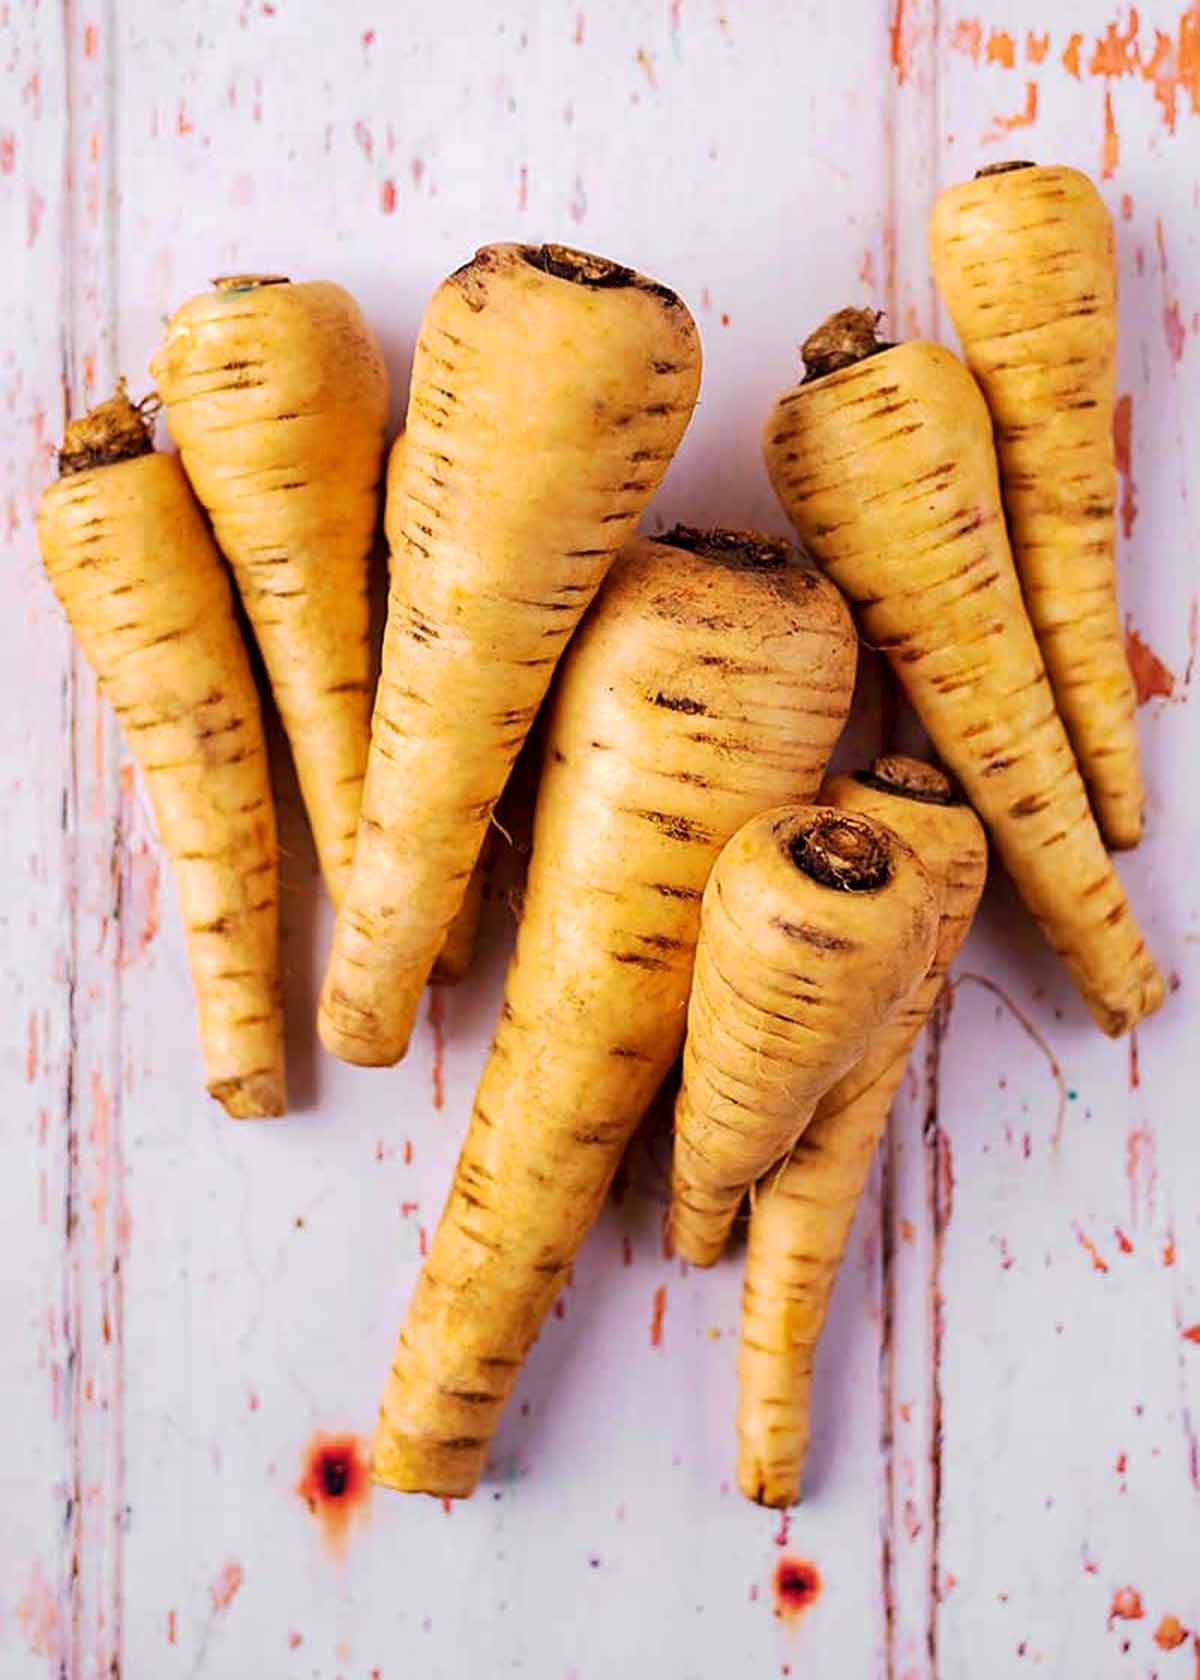 Eight parsnips on a wooden surface.